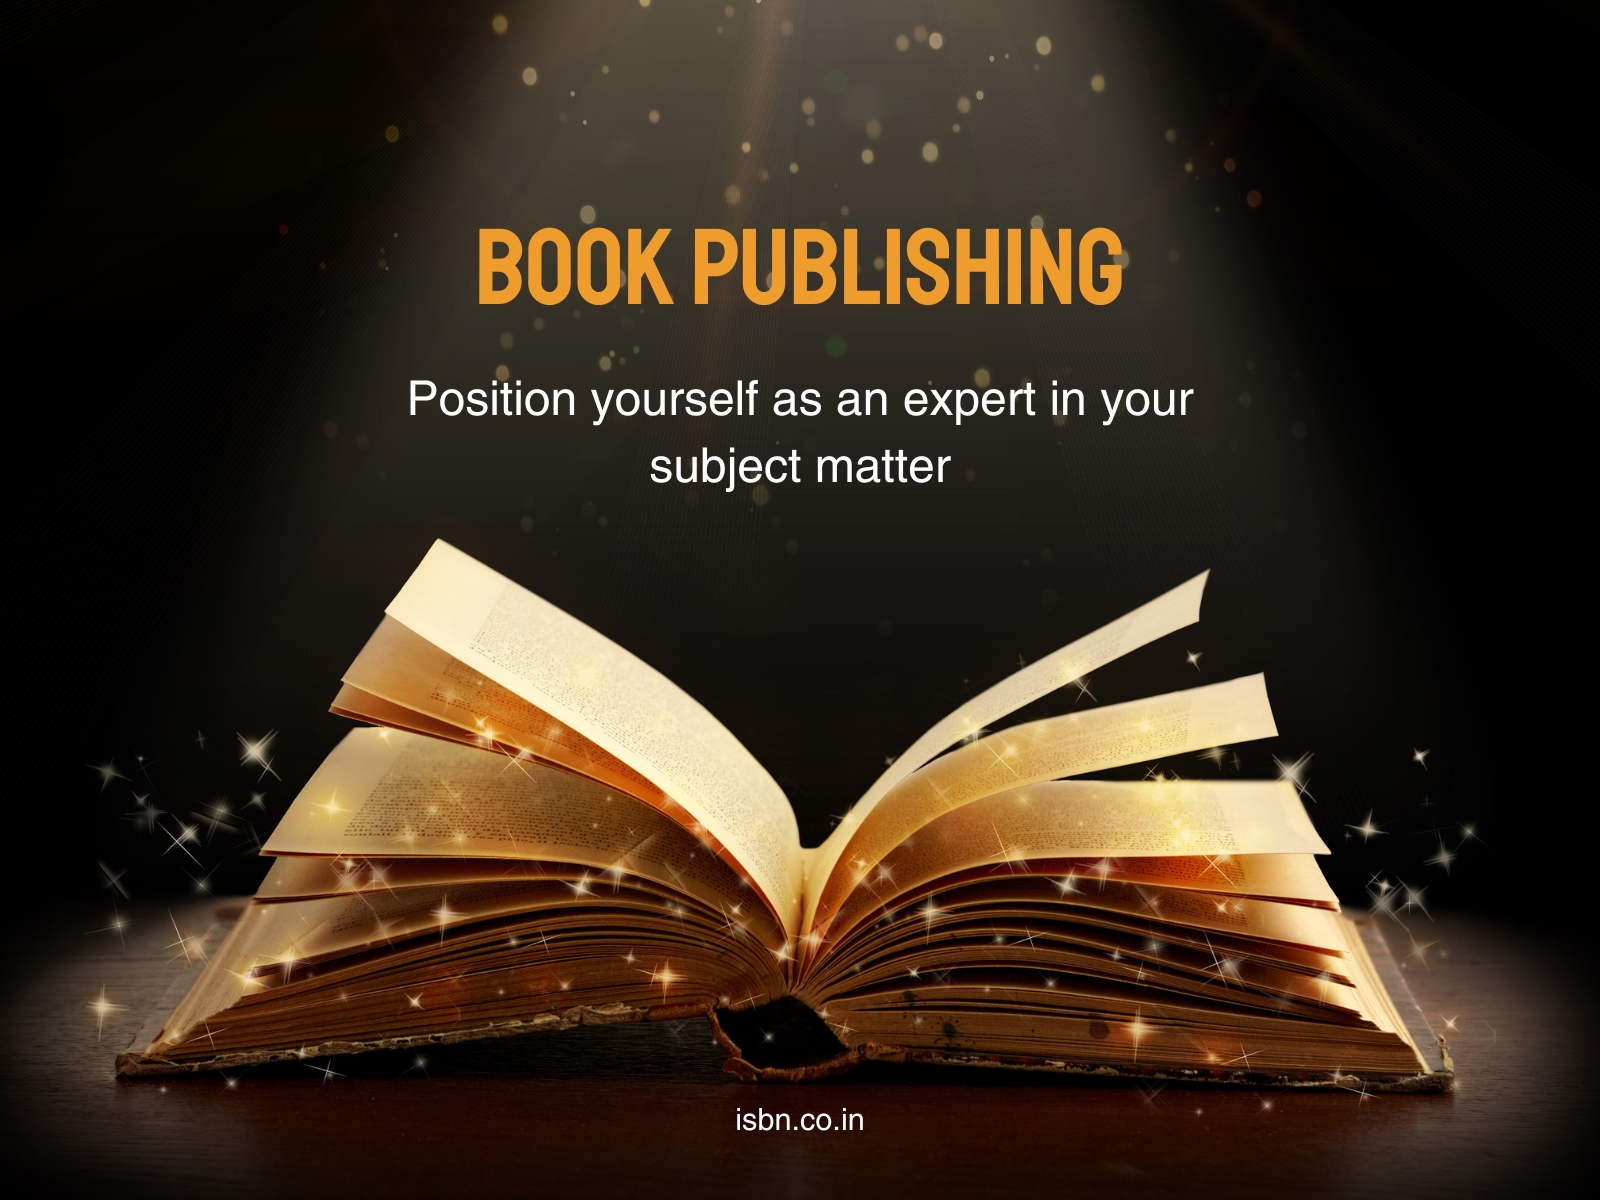 Learn about the latest tips and strategies to self-publish your book at a low cost. There are many benefits of publishing a book